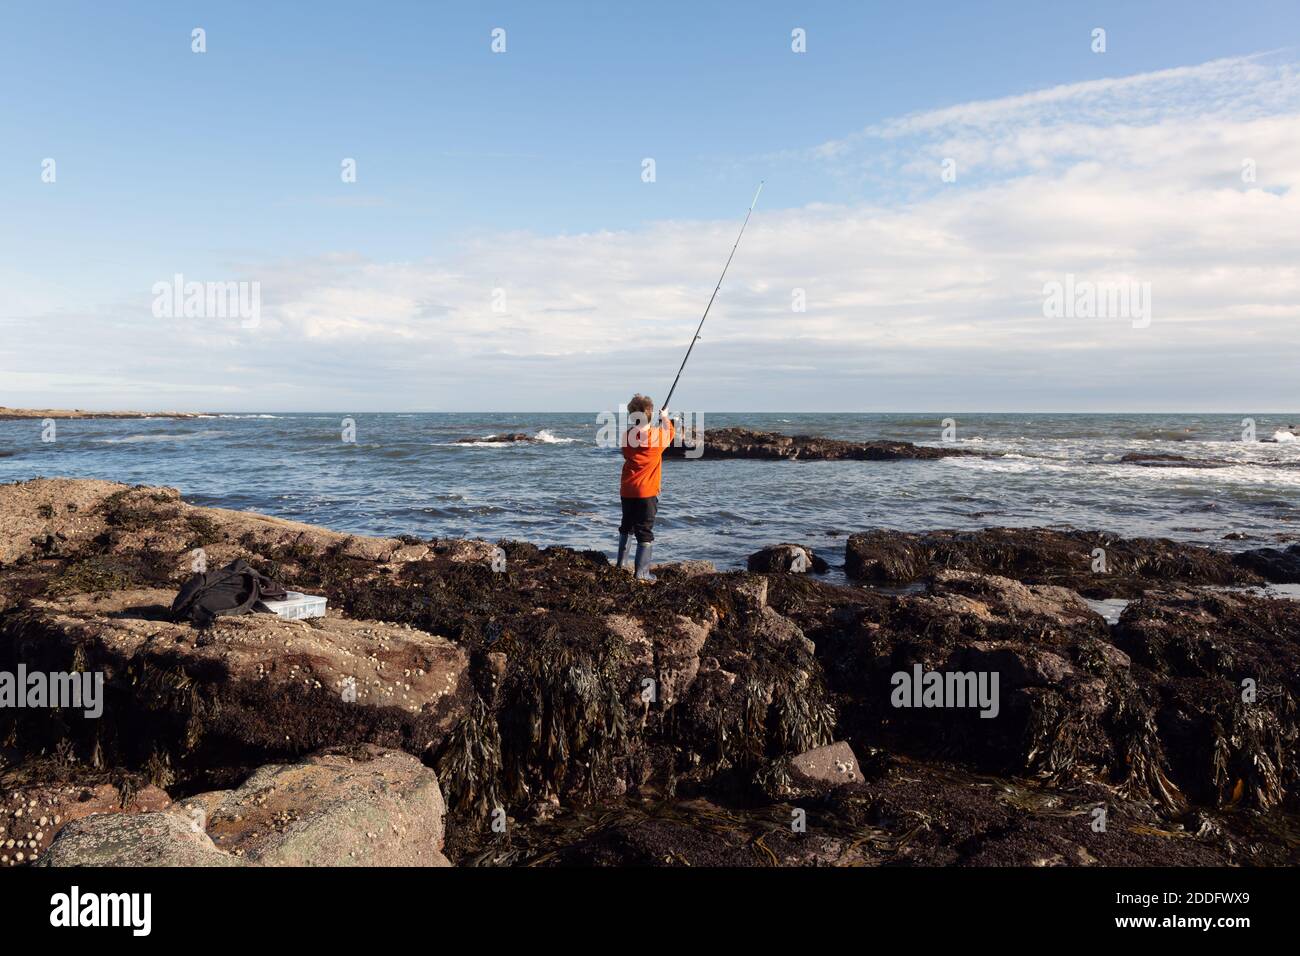 A 6yr old boy is fishing in the sea, with his tackle box and a bag on the rocks behind him. He is using a weedless lure. Stock Photo